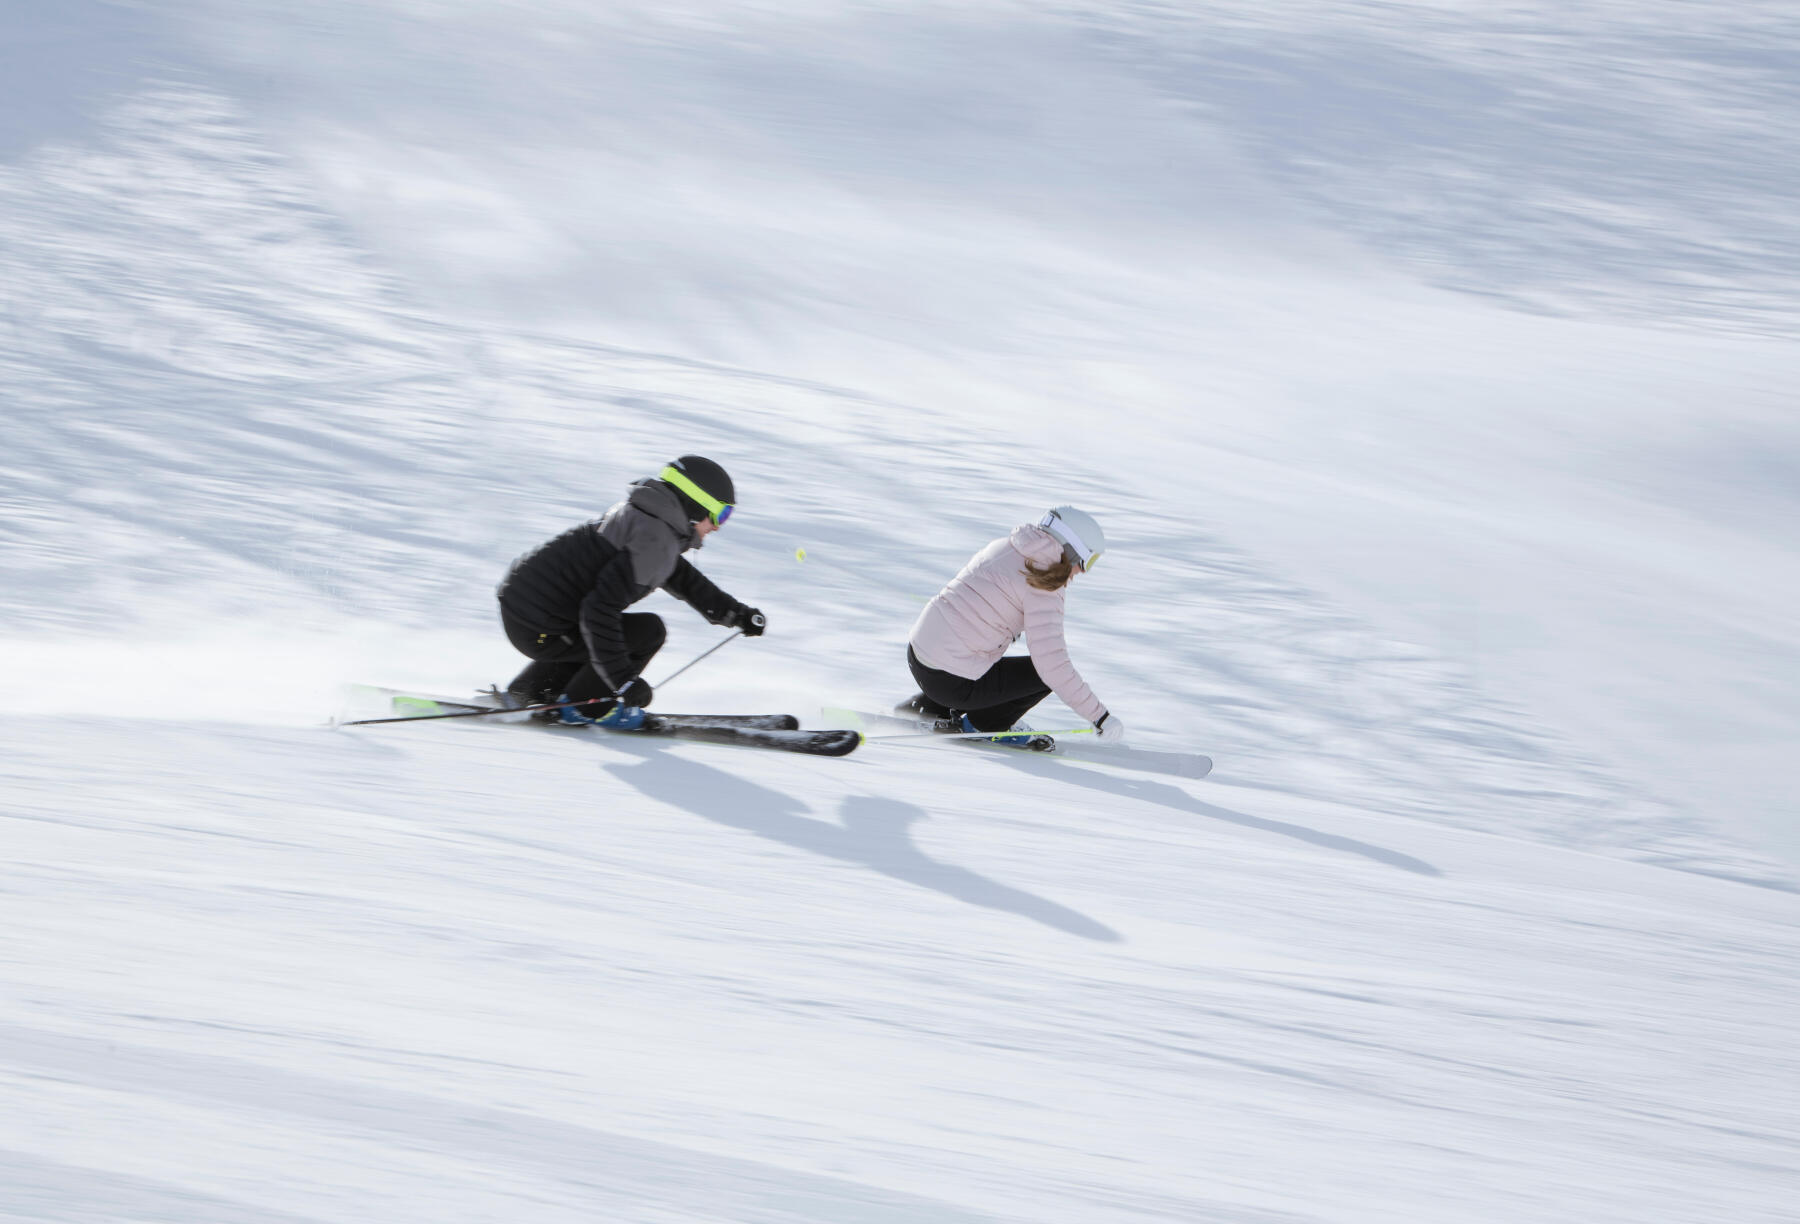 The benefits of skiing, a sport to be discovered with Decathlon's sports advice